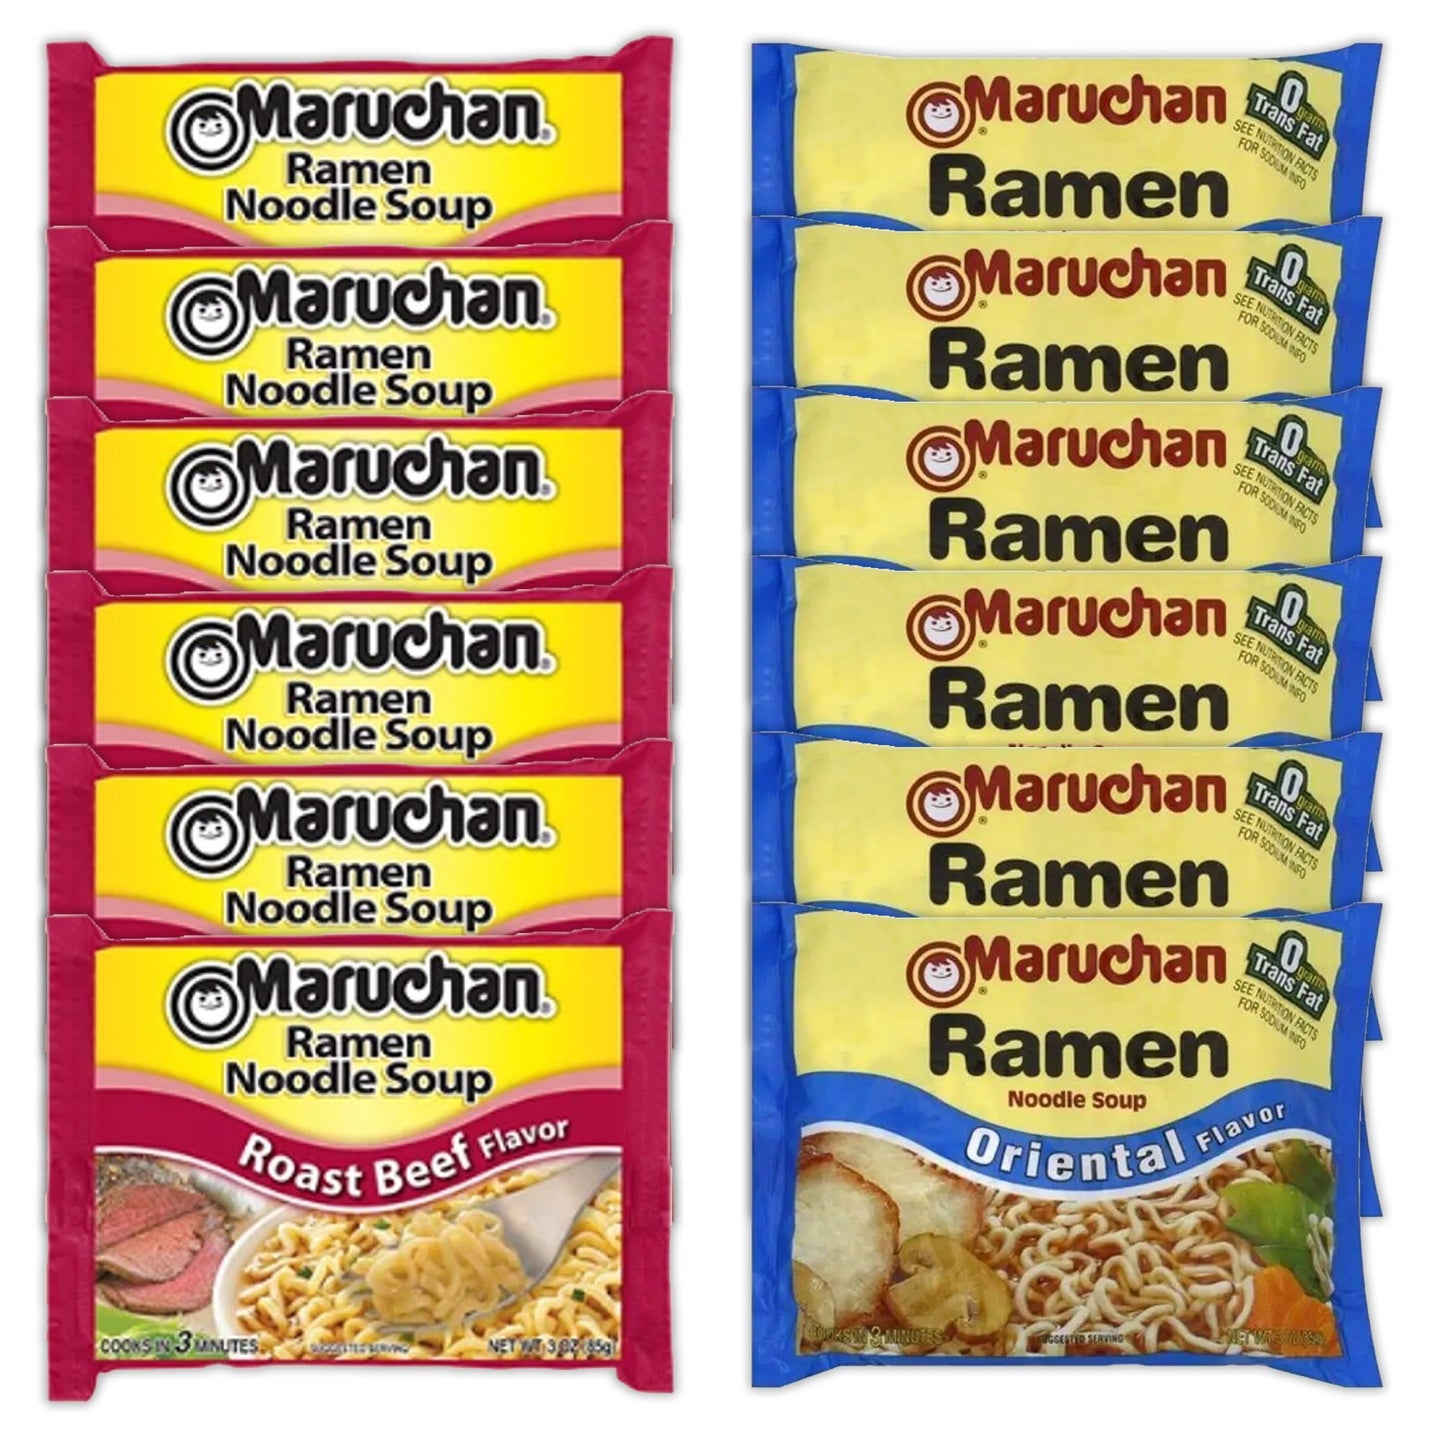 Maruchan Ramen Instant Noodle Soup Variety, 2 Flavors - 6 Packs Roast Beef & 6 Packs Soy Sauce , 3 Ounce Single Servings Lunch / Dinner Variety